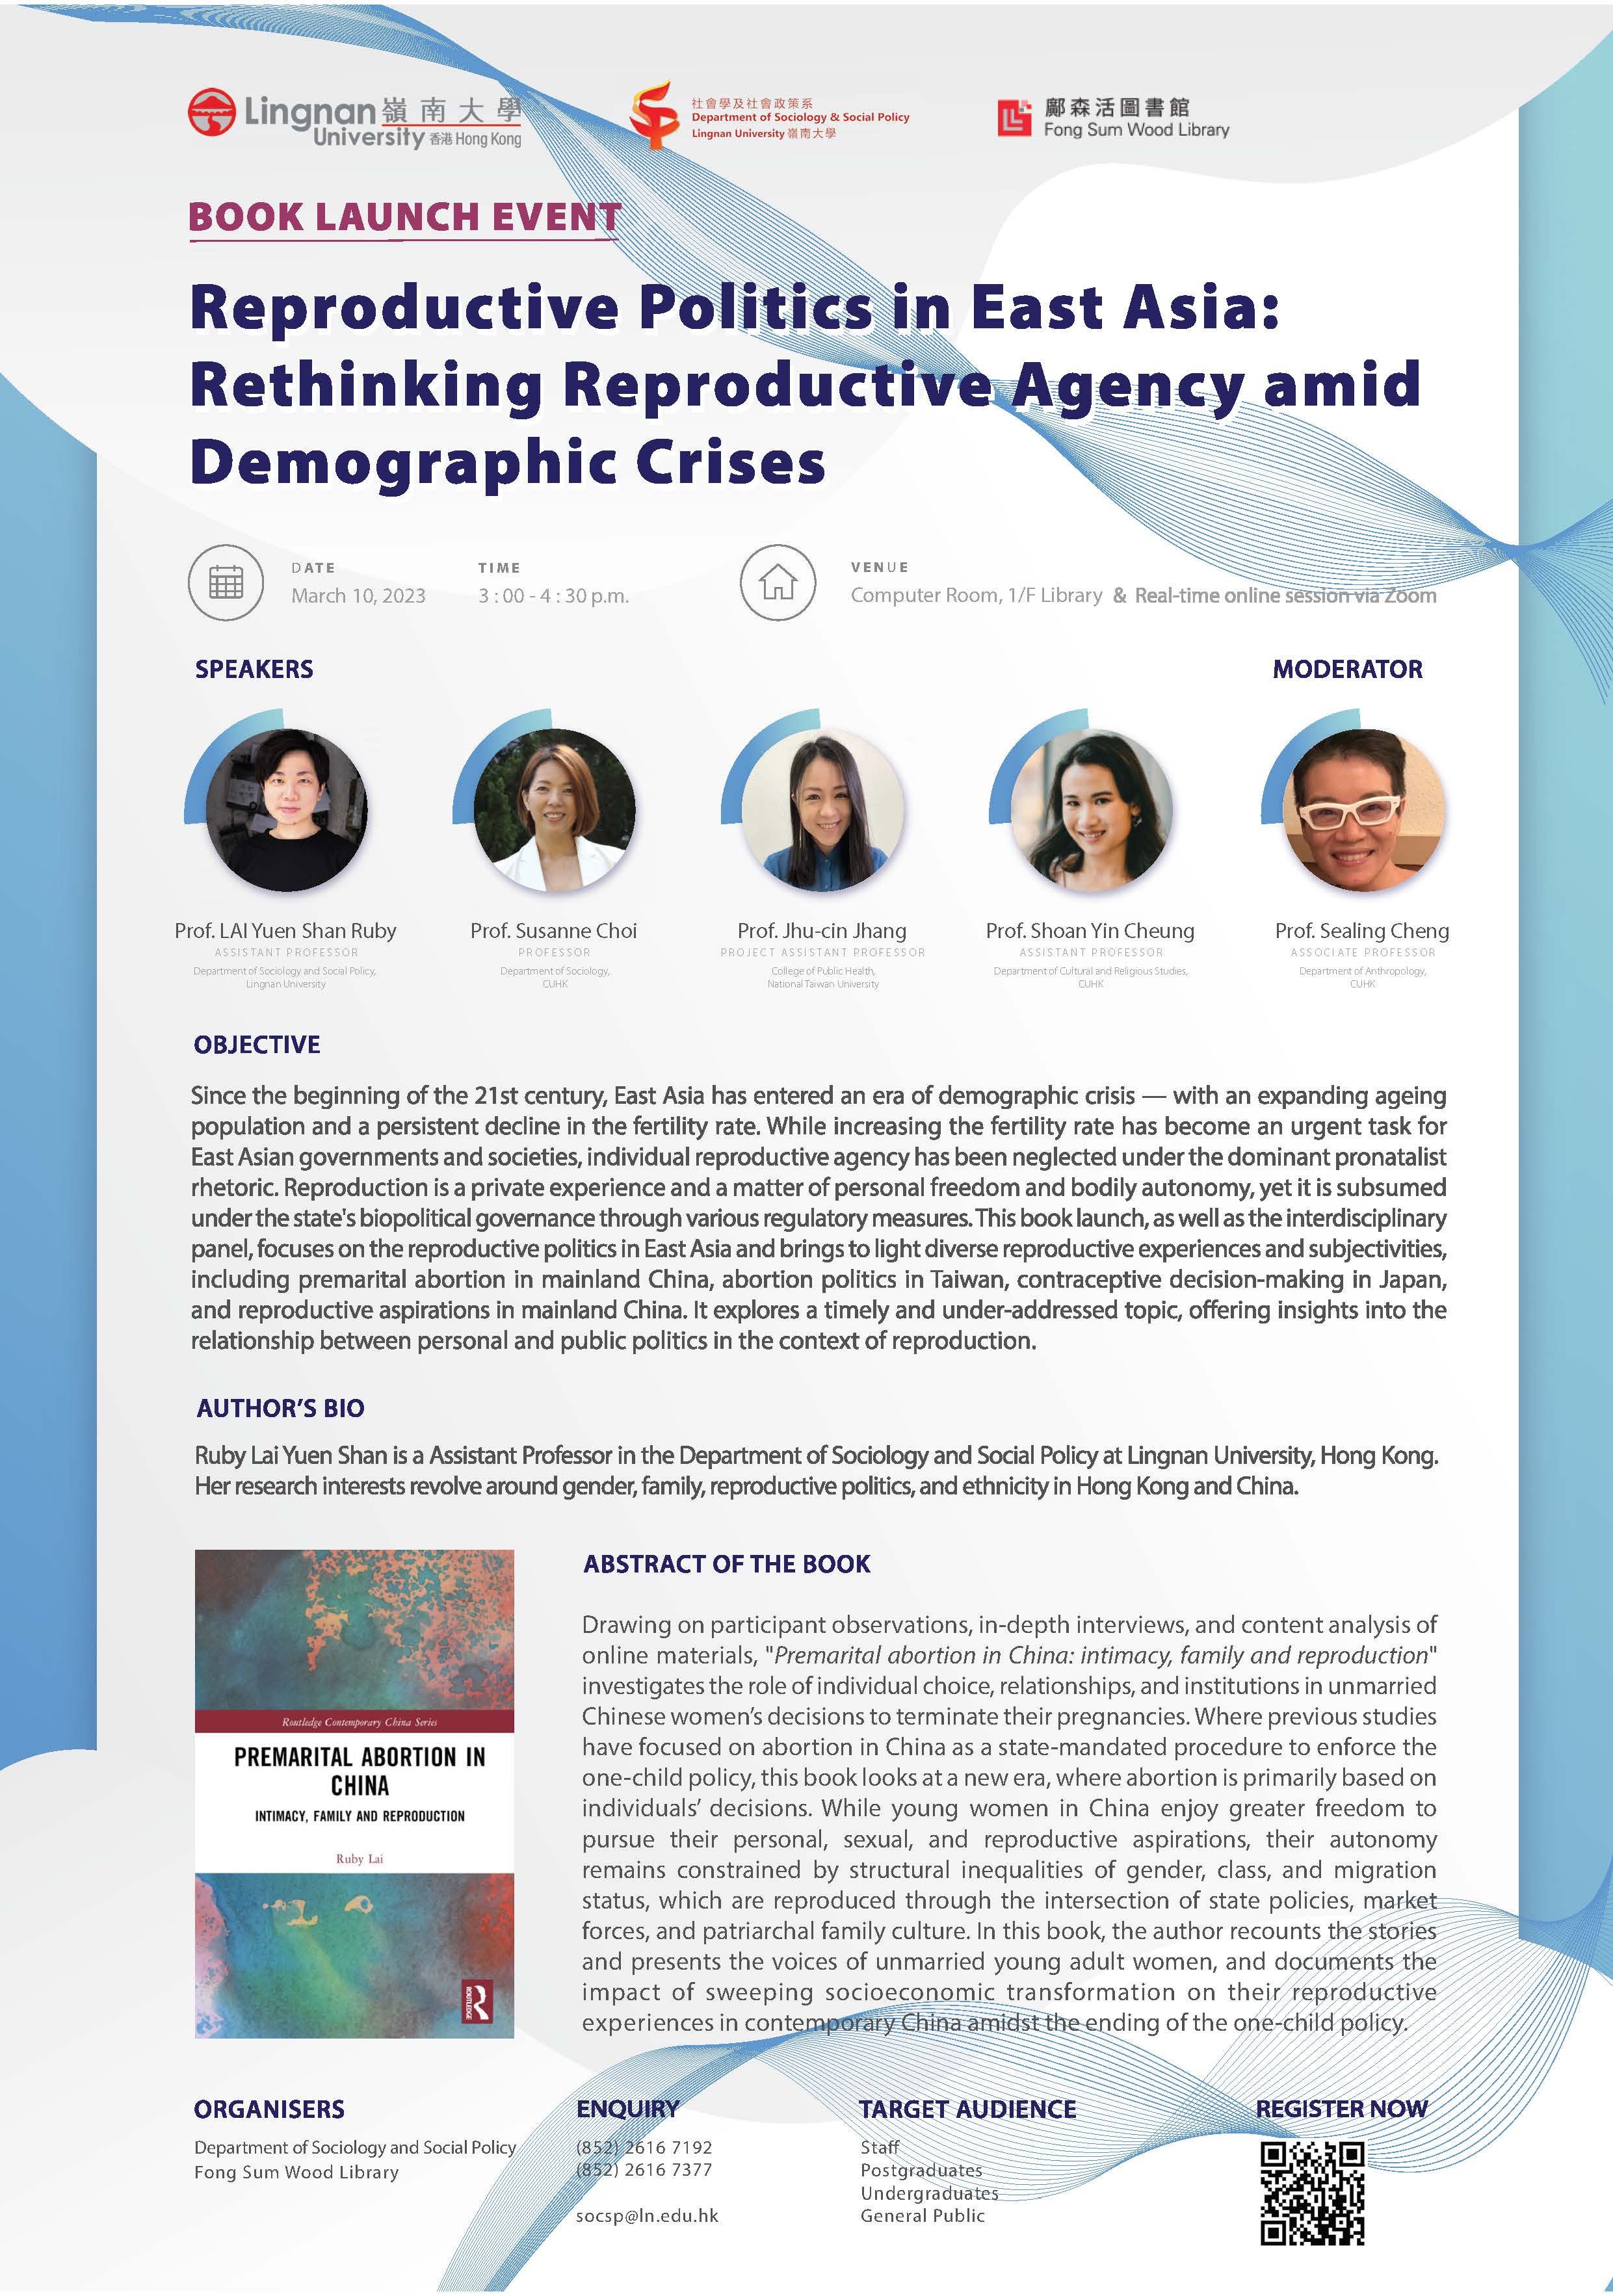 Book Launch Event — Reproductive Politics in East Asia: Rethinking Reproductive Agency amid Demographic Crises